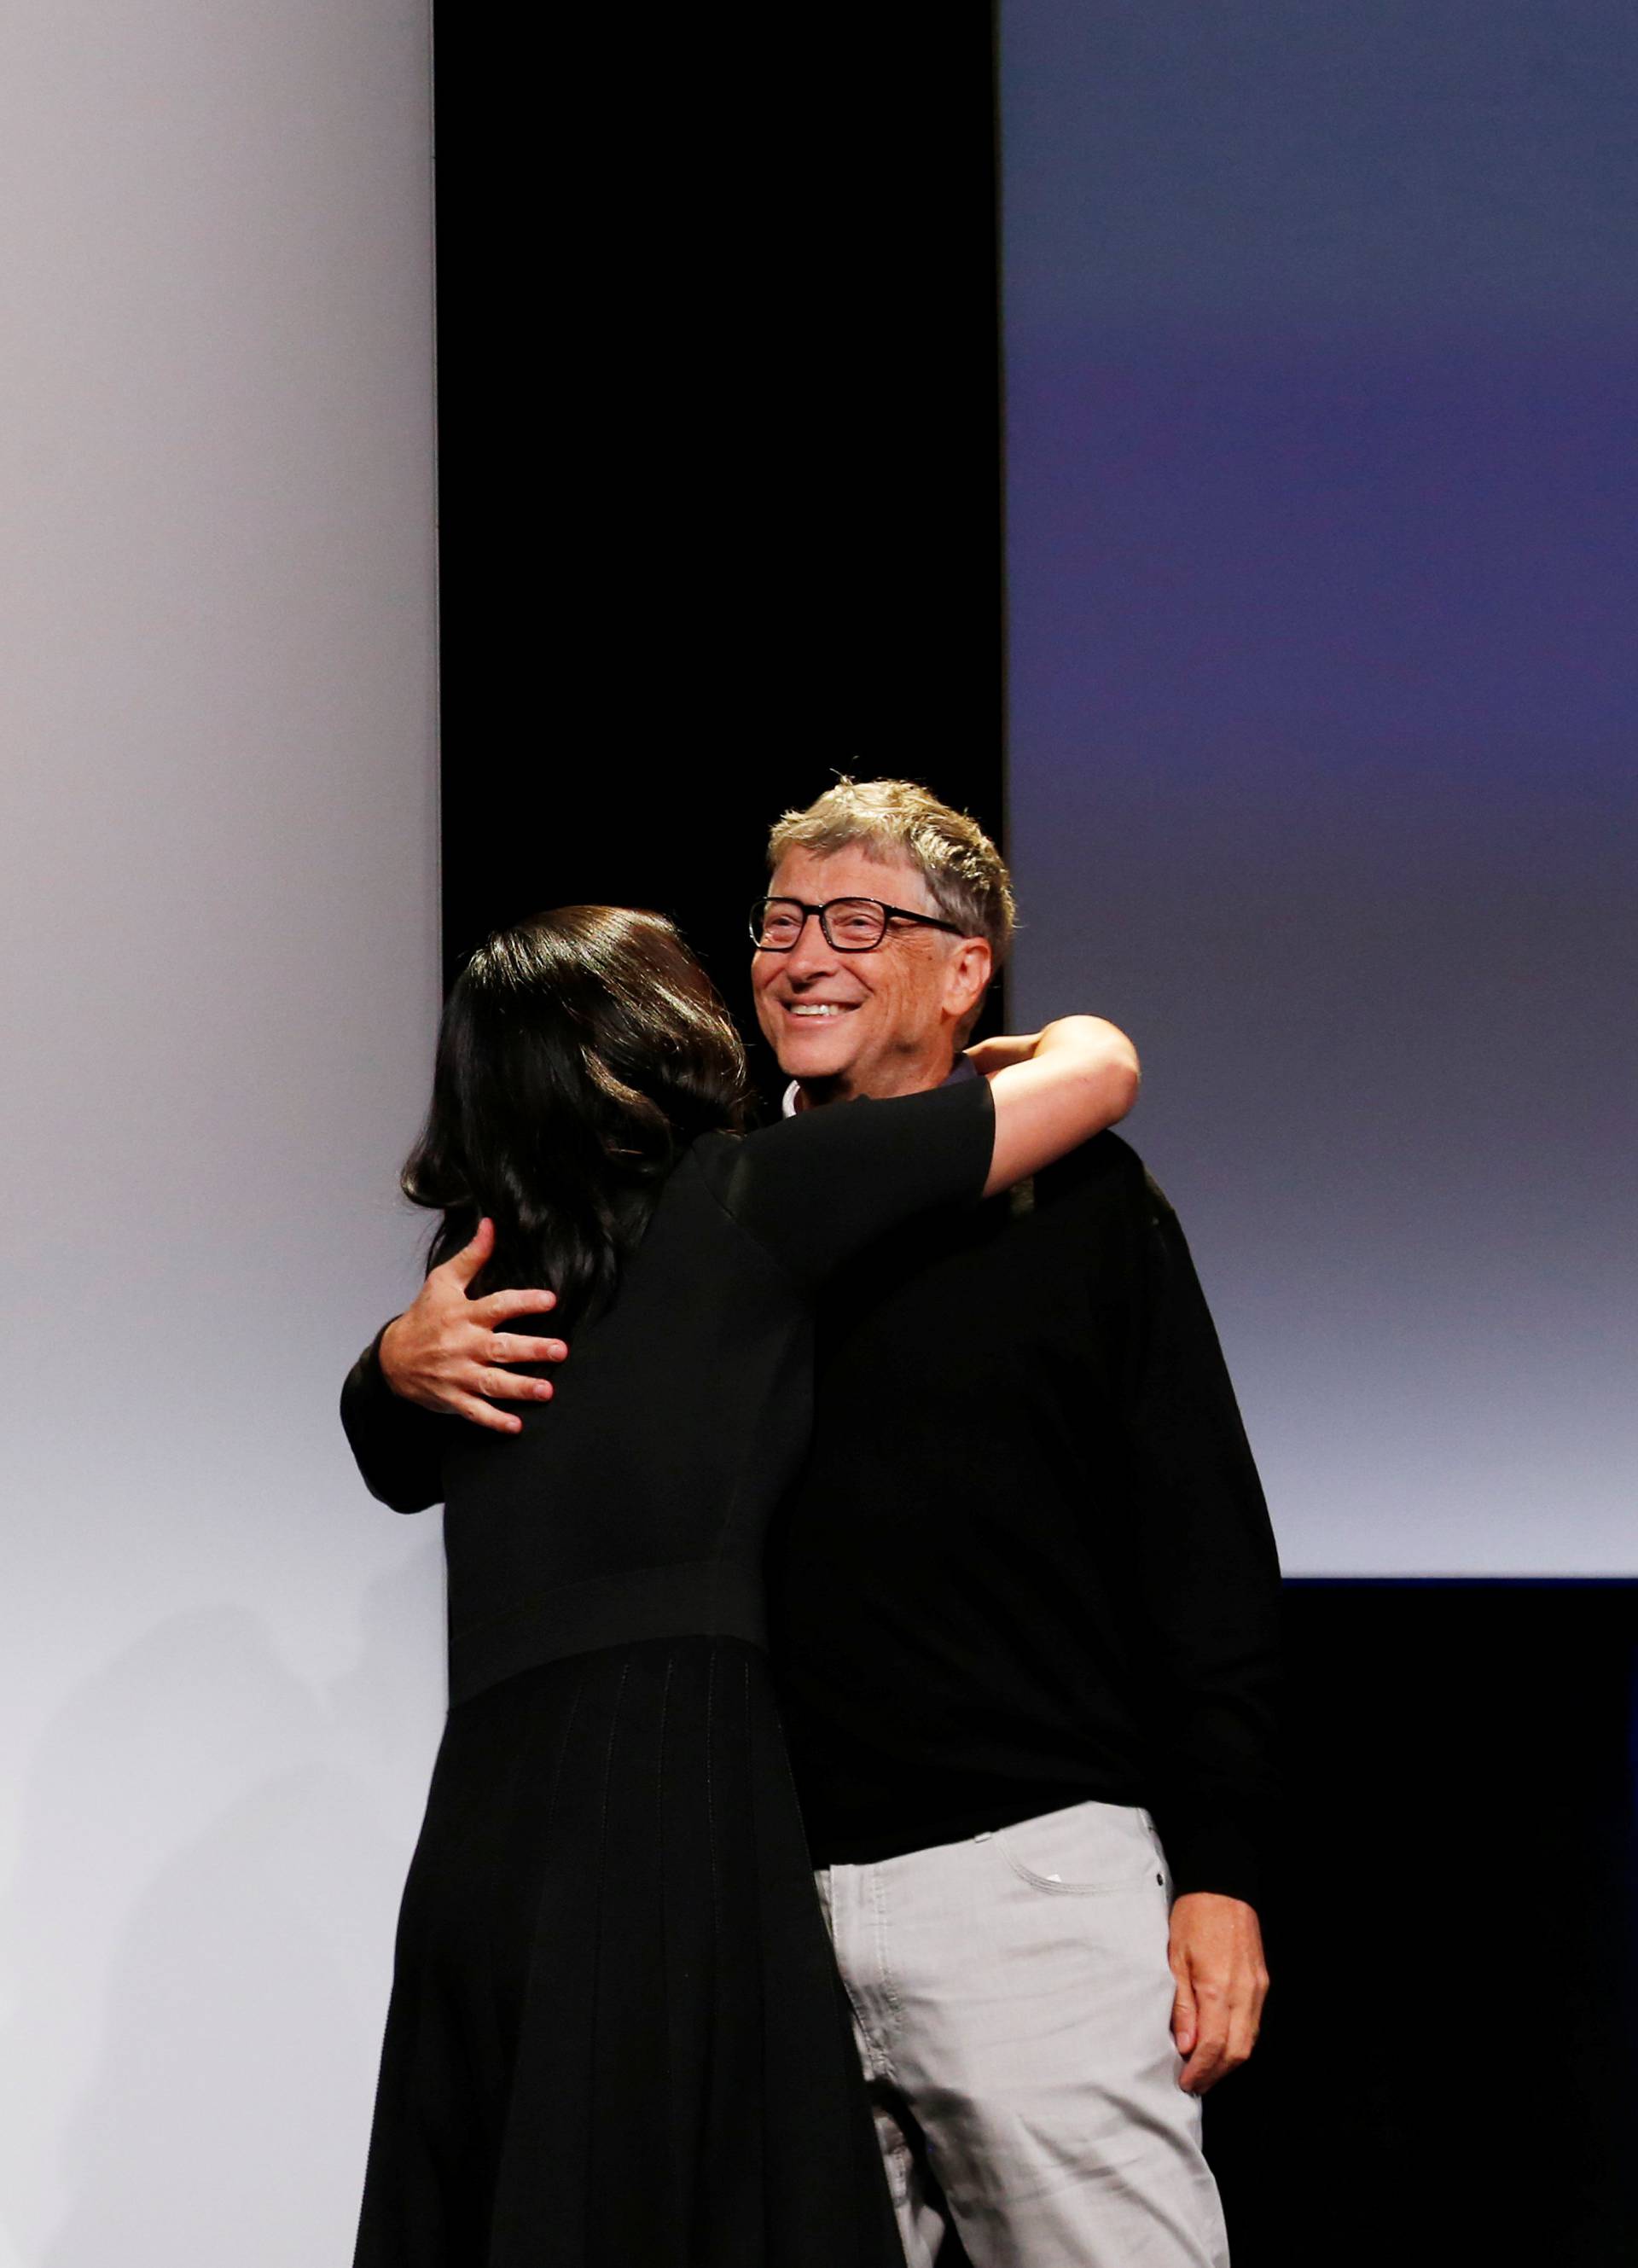 Philanthropist Bill Gates embraces Pricilla Chan during an announcement of the Chan Zuckerberg Initiative to cure all diseases by the end of the century during a news conference at UCSF Mission Bay in San Francisco, Califor